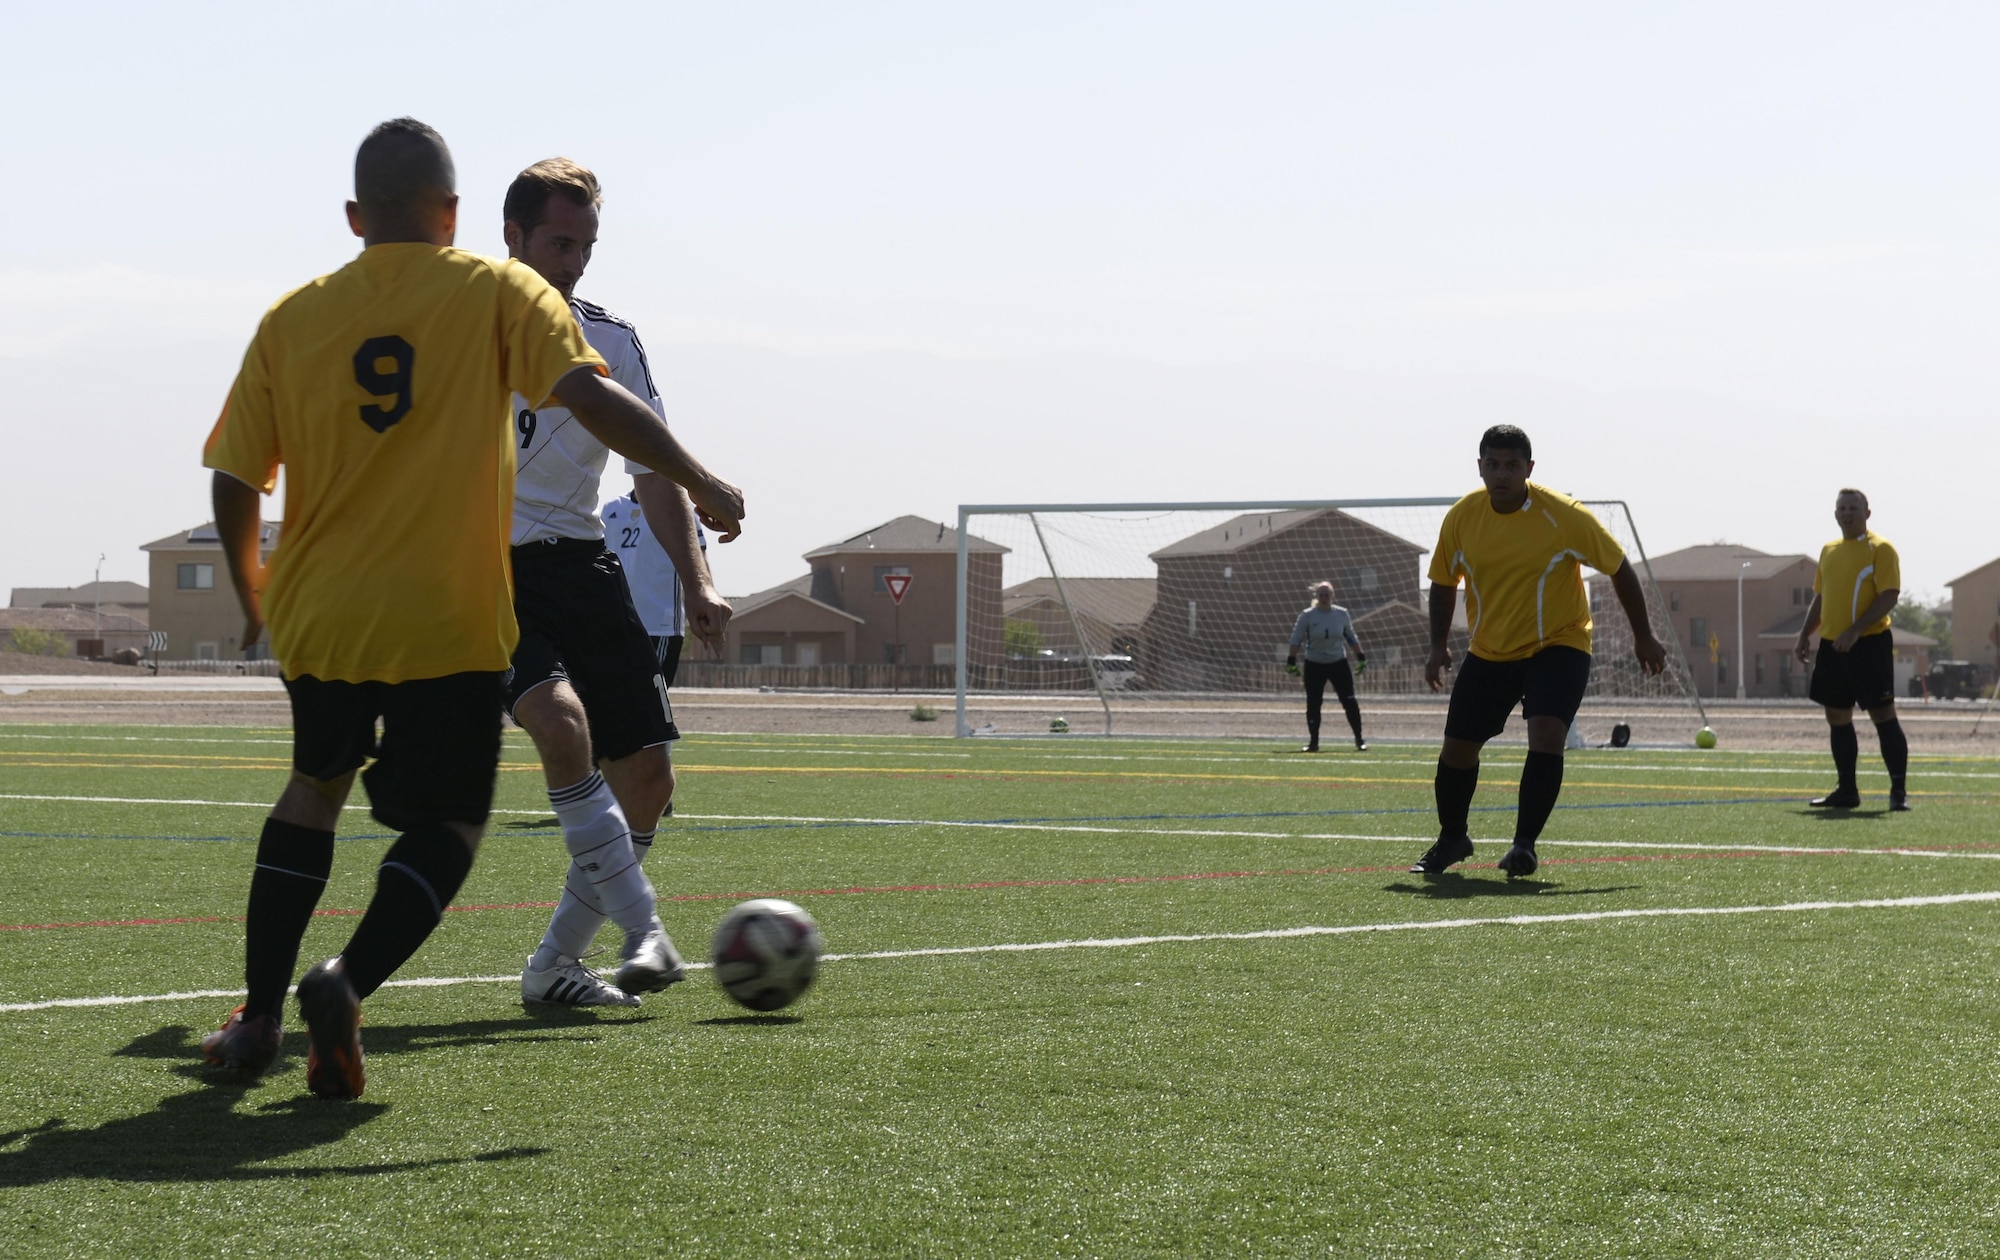 Soccer players from both the U.S. and German air forces compete during the annual soccer match at Holloman Air Force Base, N.M. on Sept. 10, 2016. Each year prior to the Oktoberfest, Holloman Airmen and the German air force compete in a friendly match to showcase their athletic abilities on the soccer field. (U.S. Air Force photo by Airman Alexis P. Docherty) 